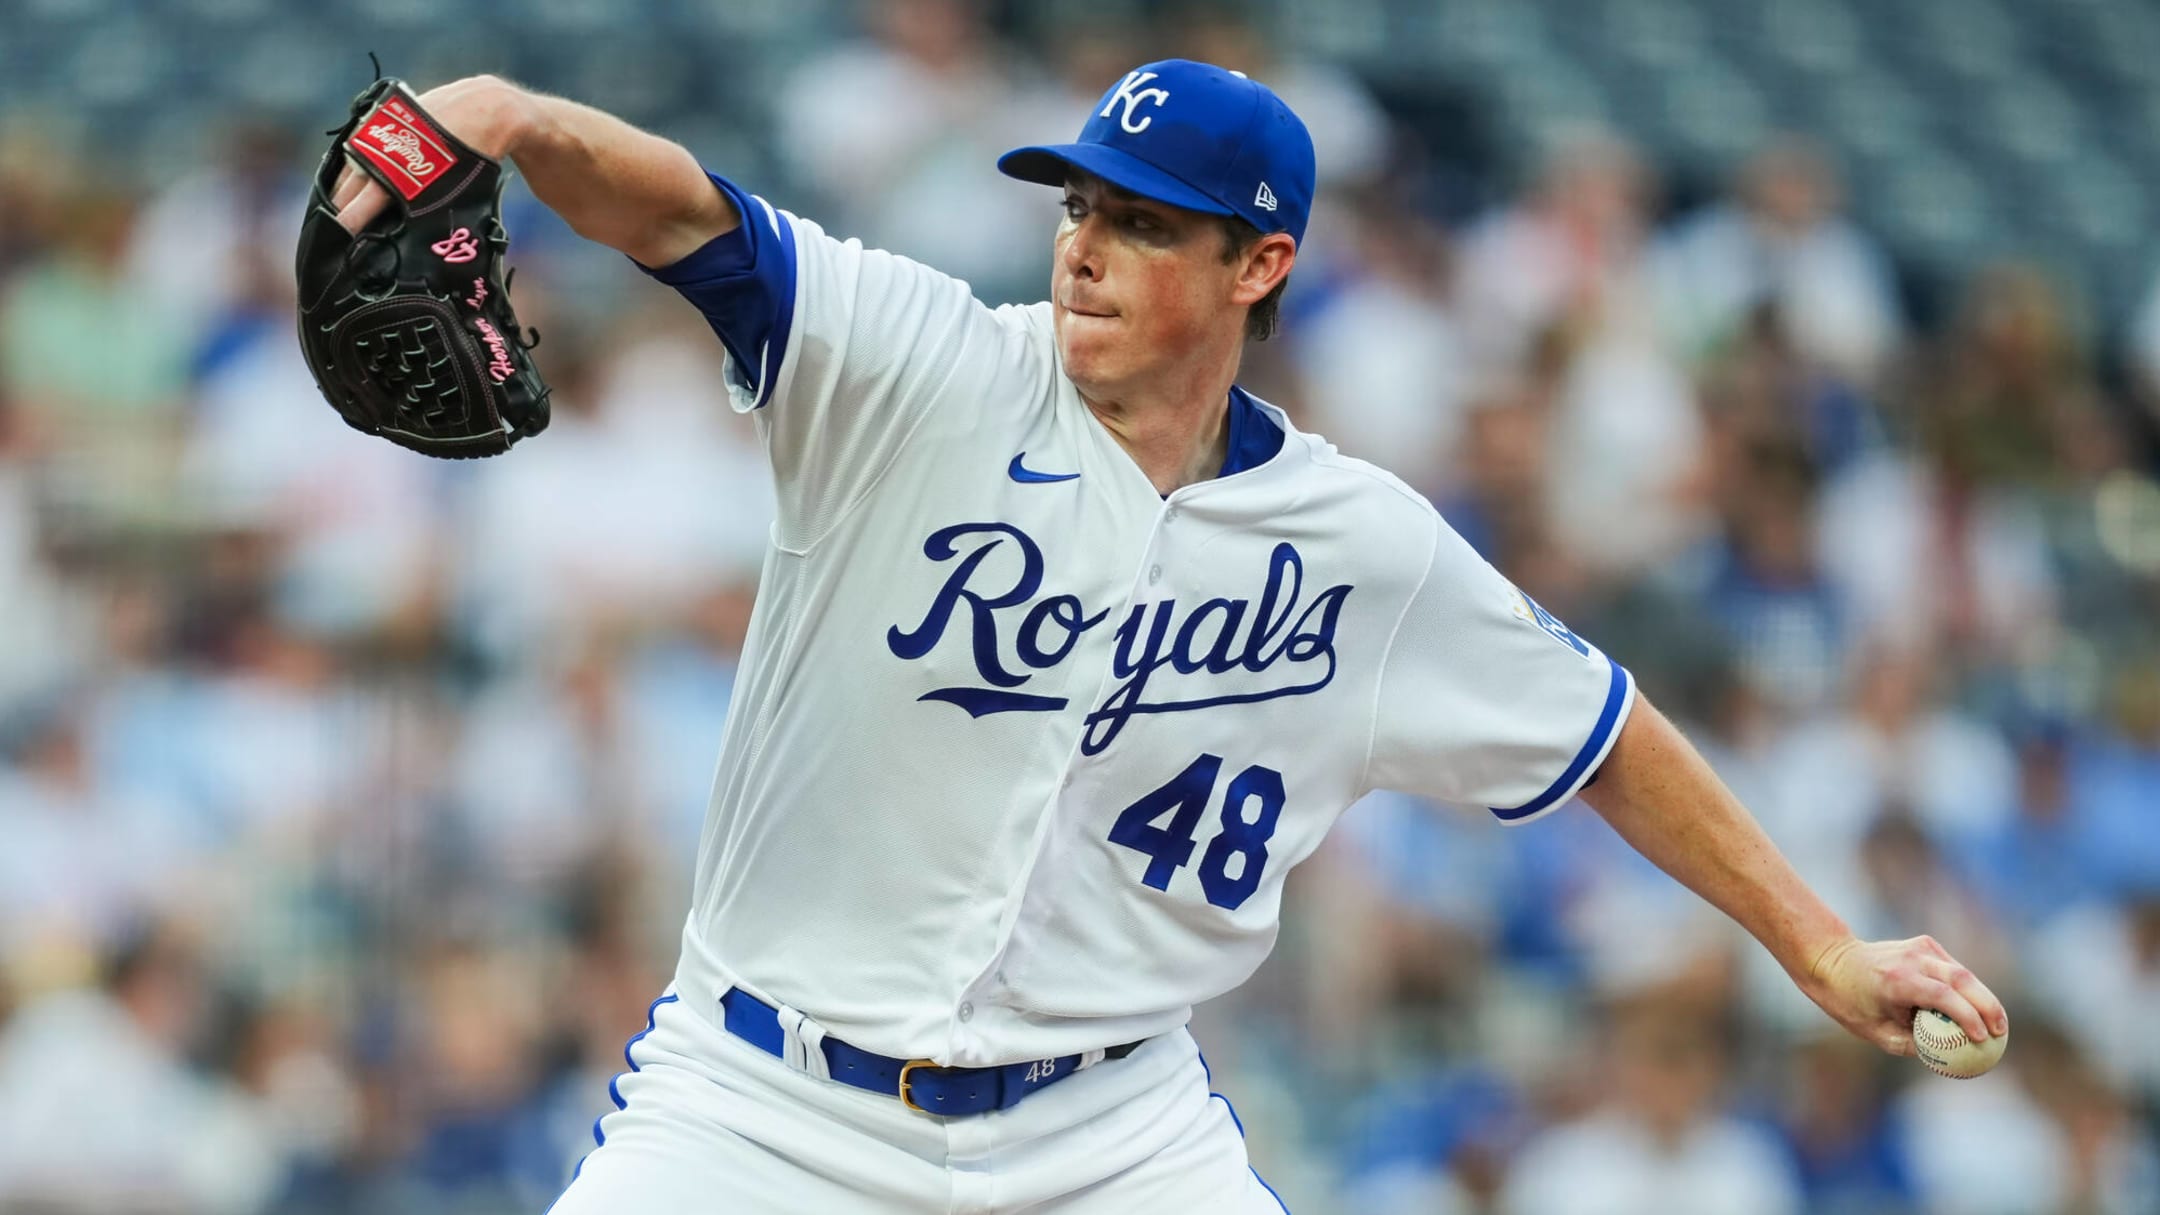 Royals trade Ryan Yarbrough to Dodgers